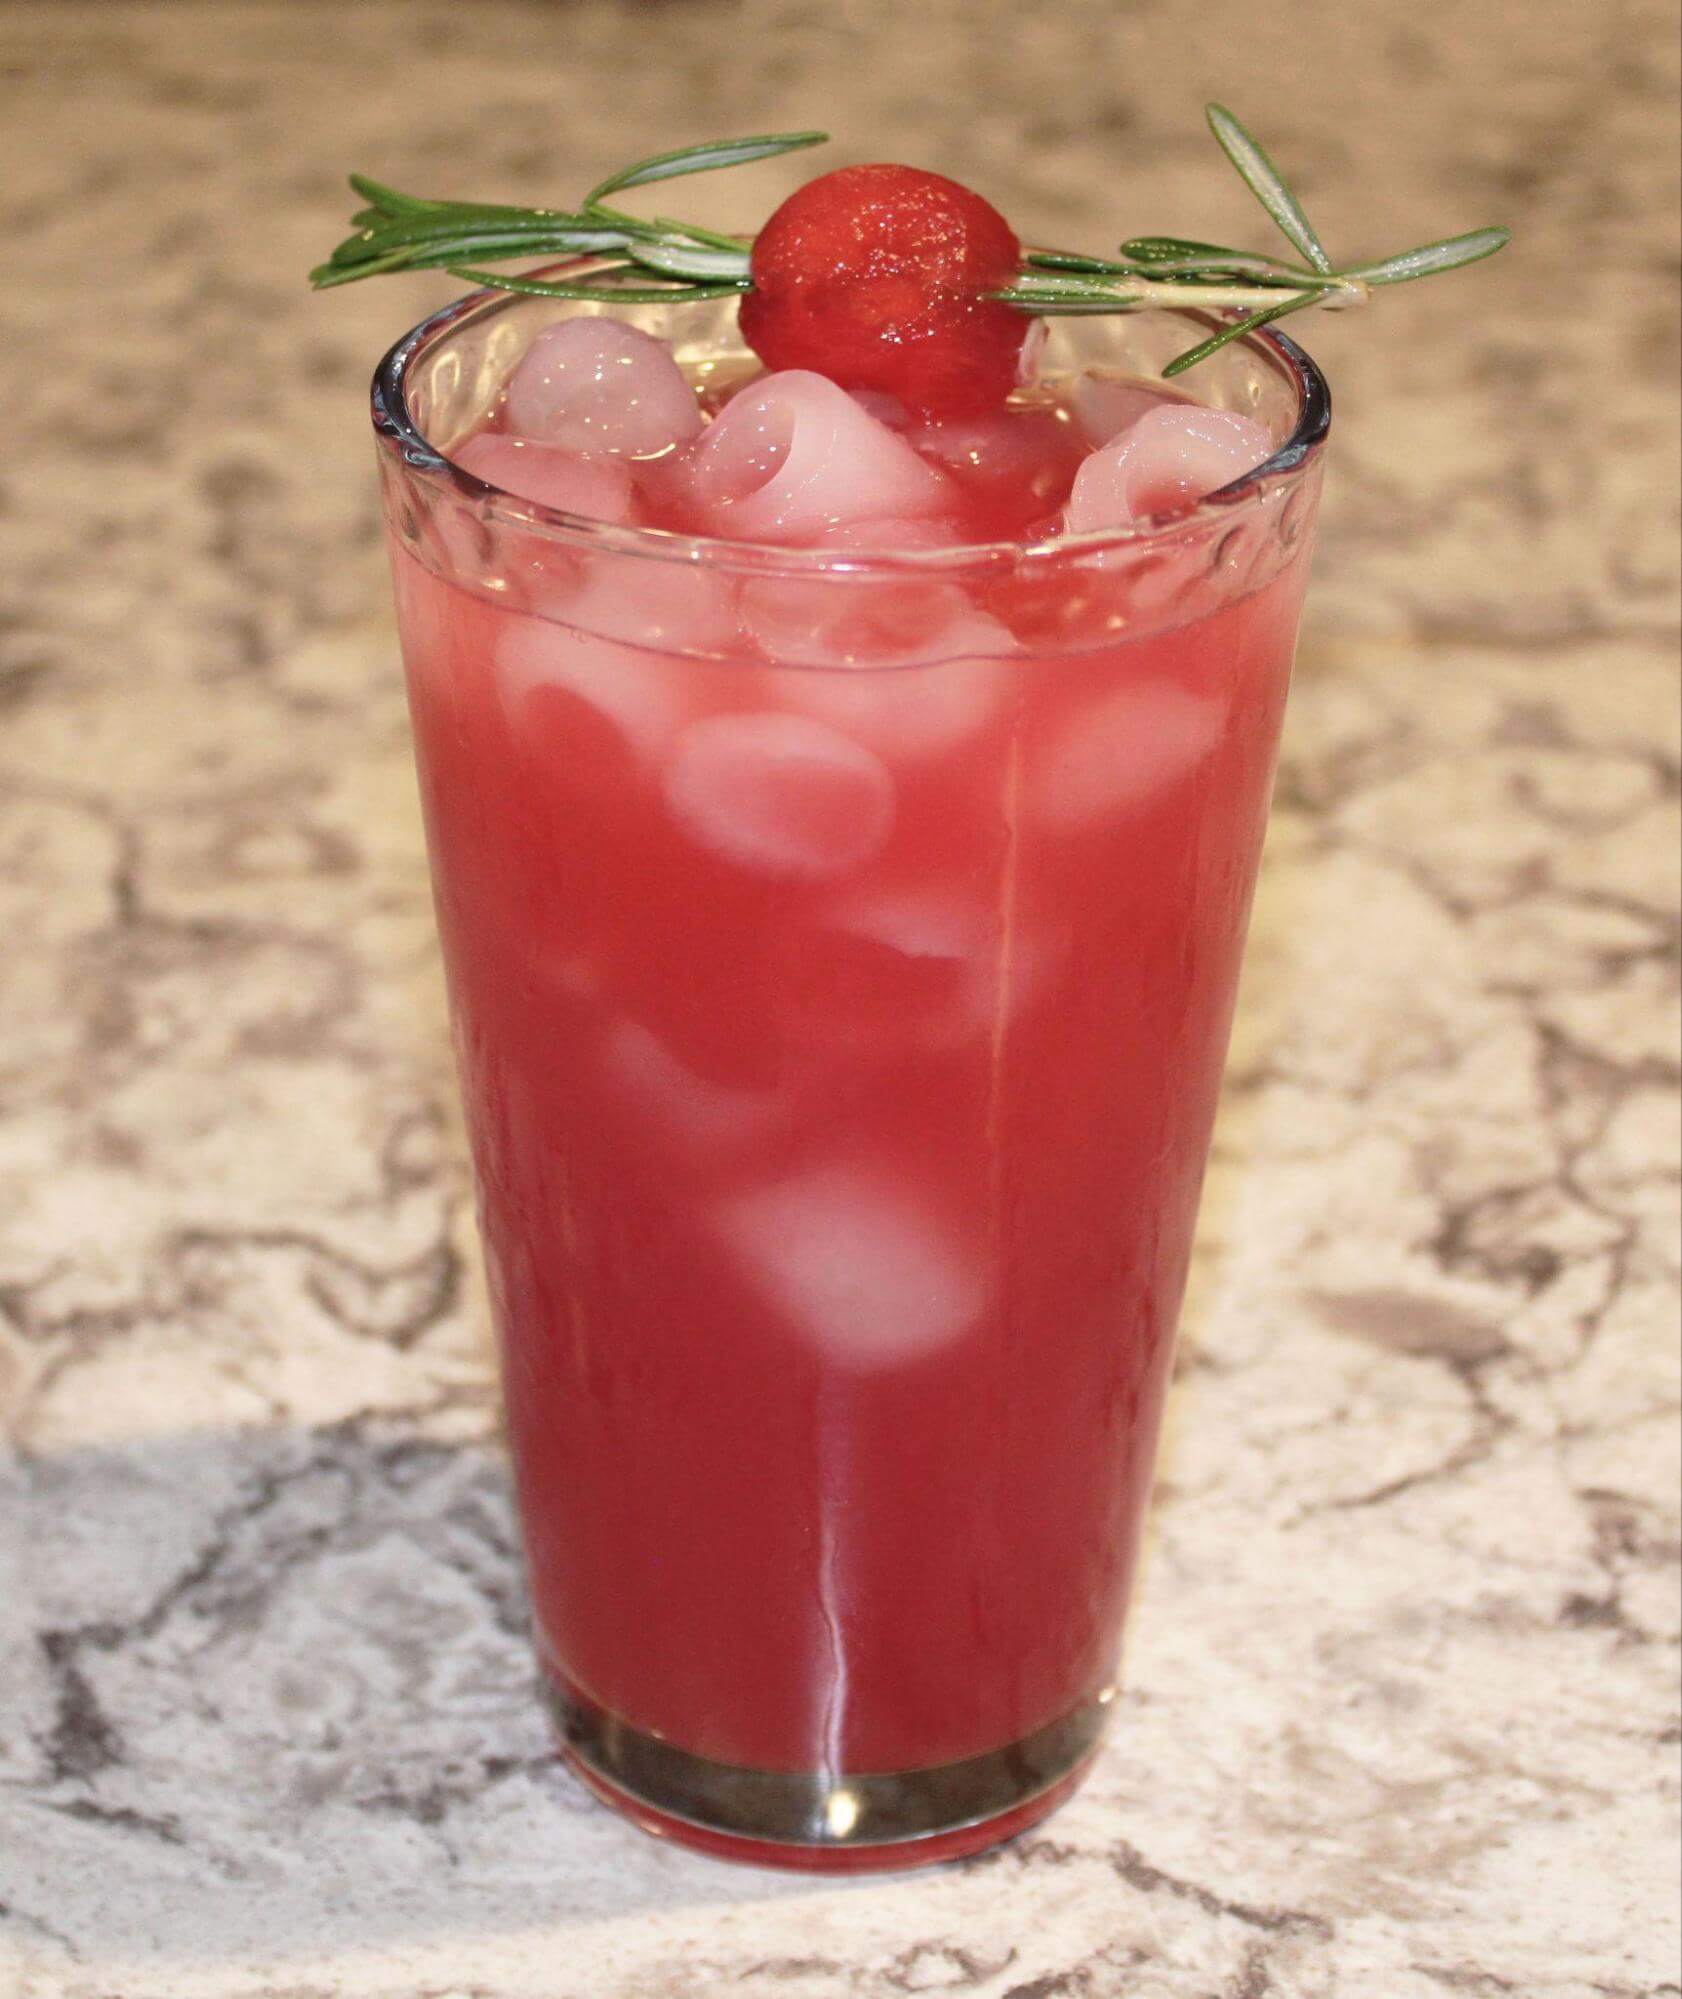 Tall glass of Watermelon Moon, a light red drink poured over ice, with a garnish of watermelon pierced with rosemary sitting across the top.